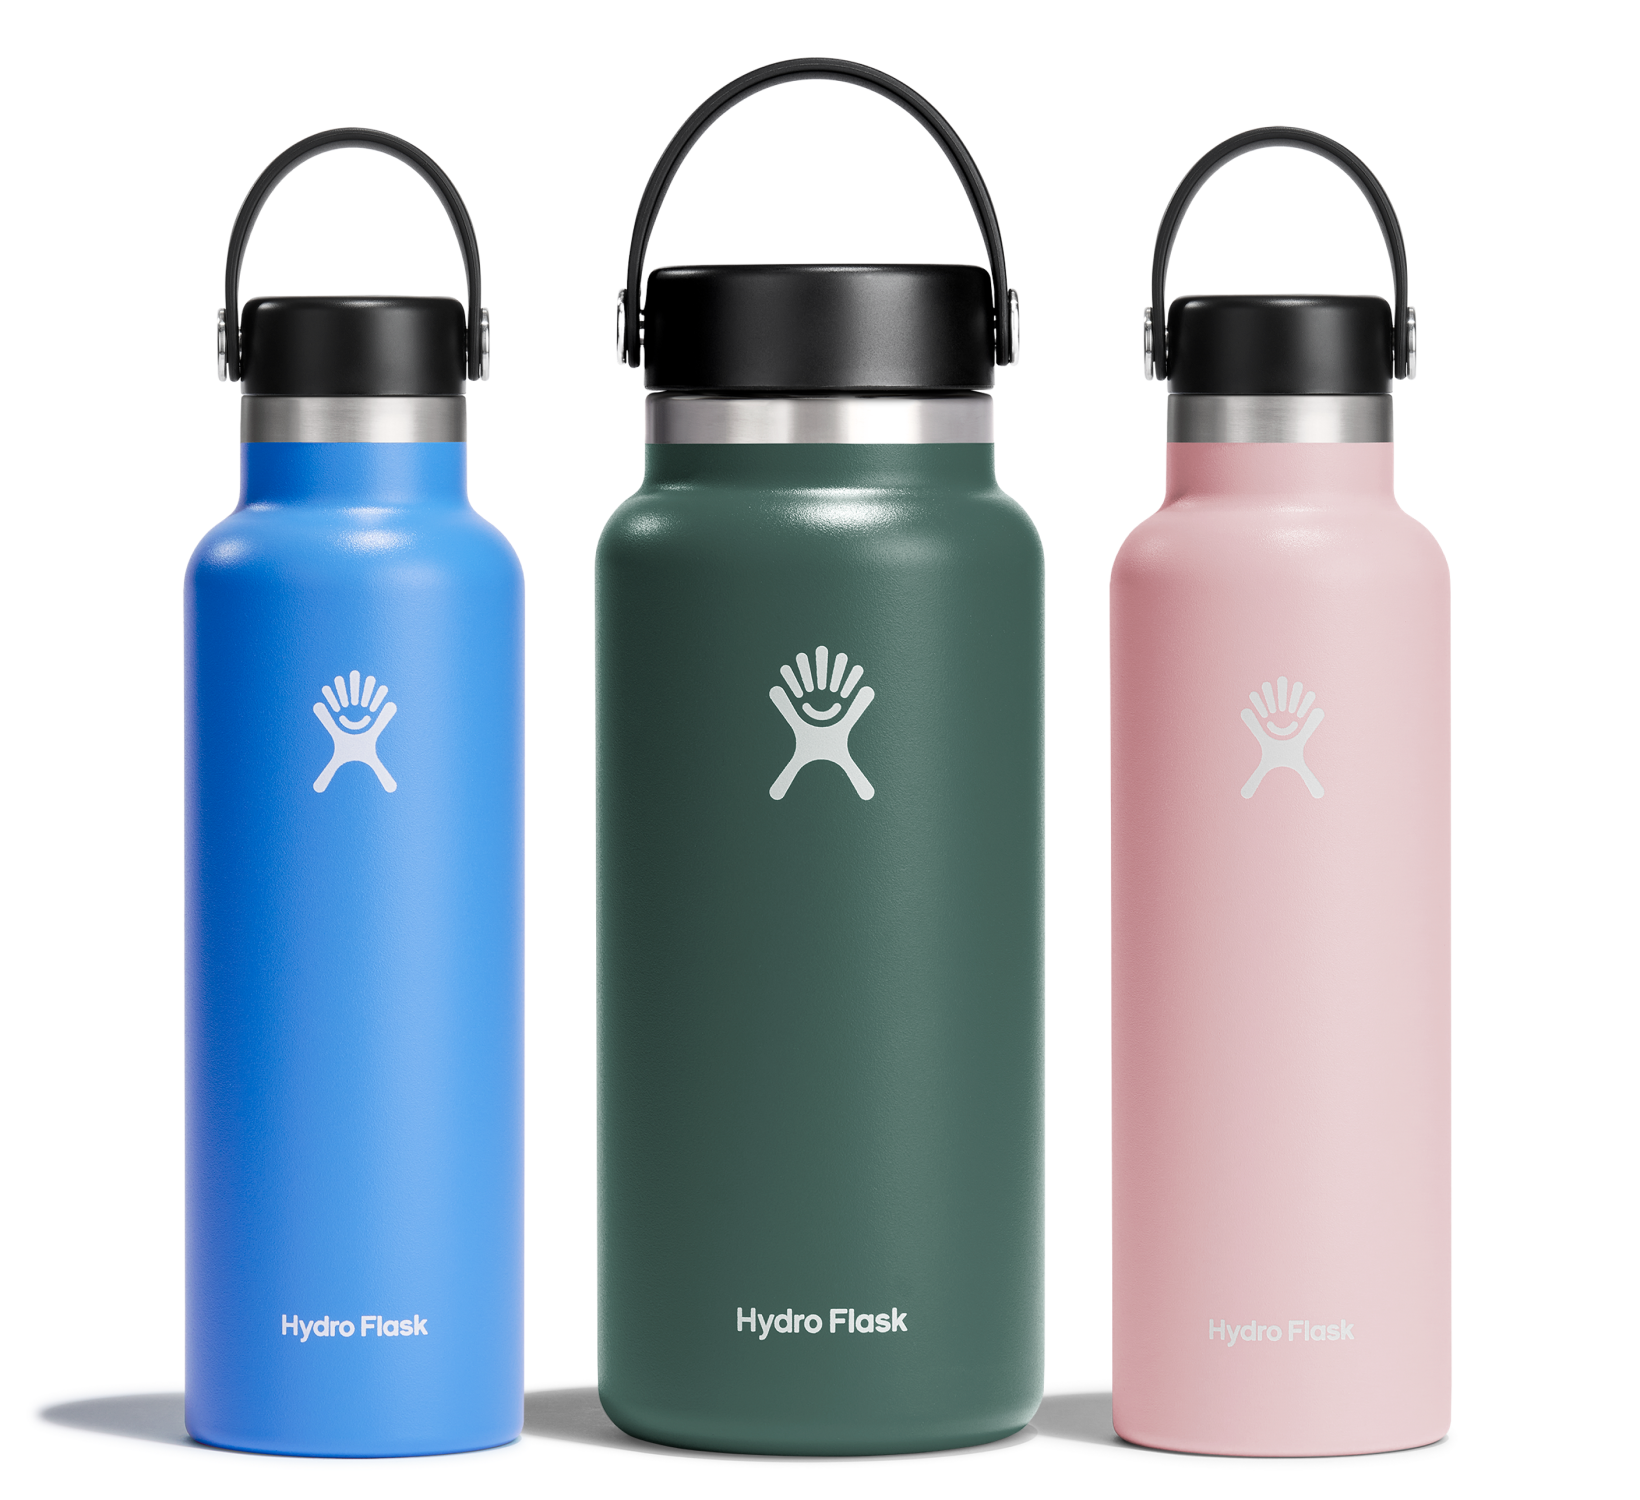 Designed for on the go hydration, our Bottles will keep you ready to take on any adventure!